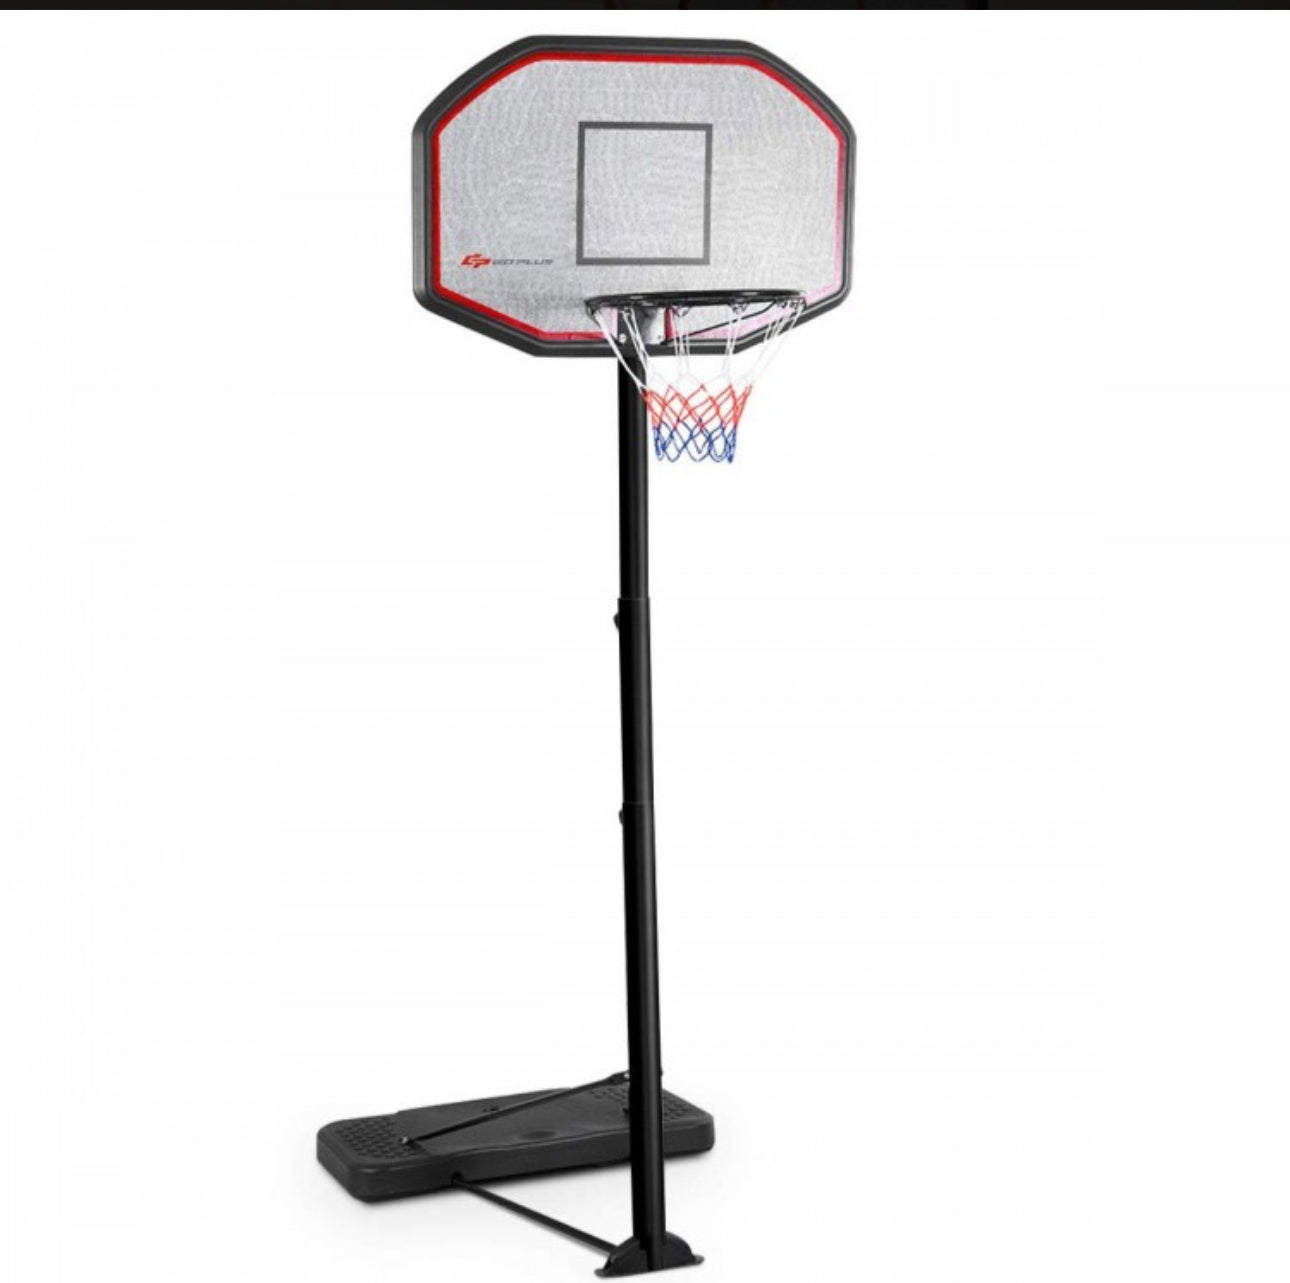 Super Cool Basketball Net Hoop Heavy Duty 43 Inches Indoor | Outdoor | Adjustable Height | Can Be Filled With Sand / Water | 6.6’ - 10’